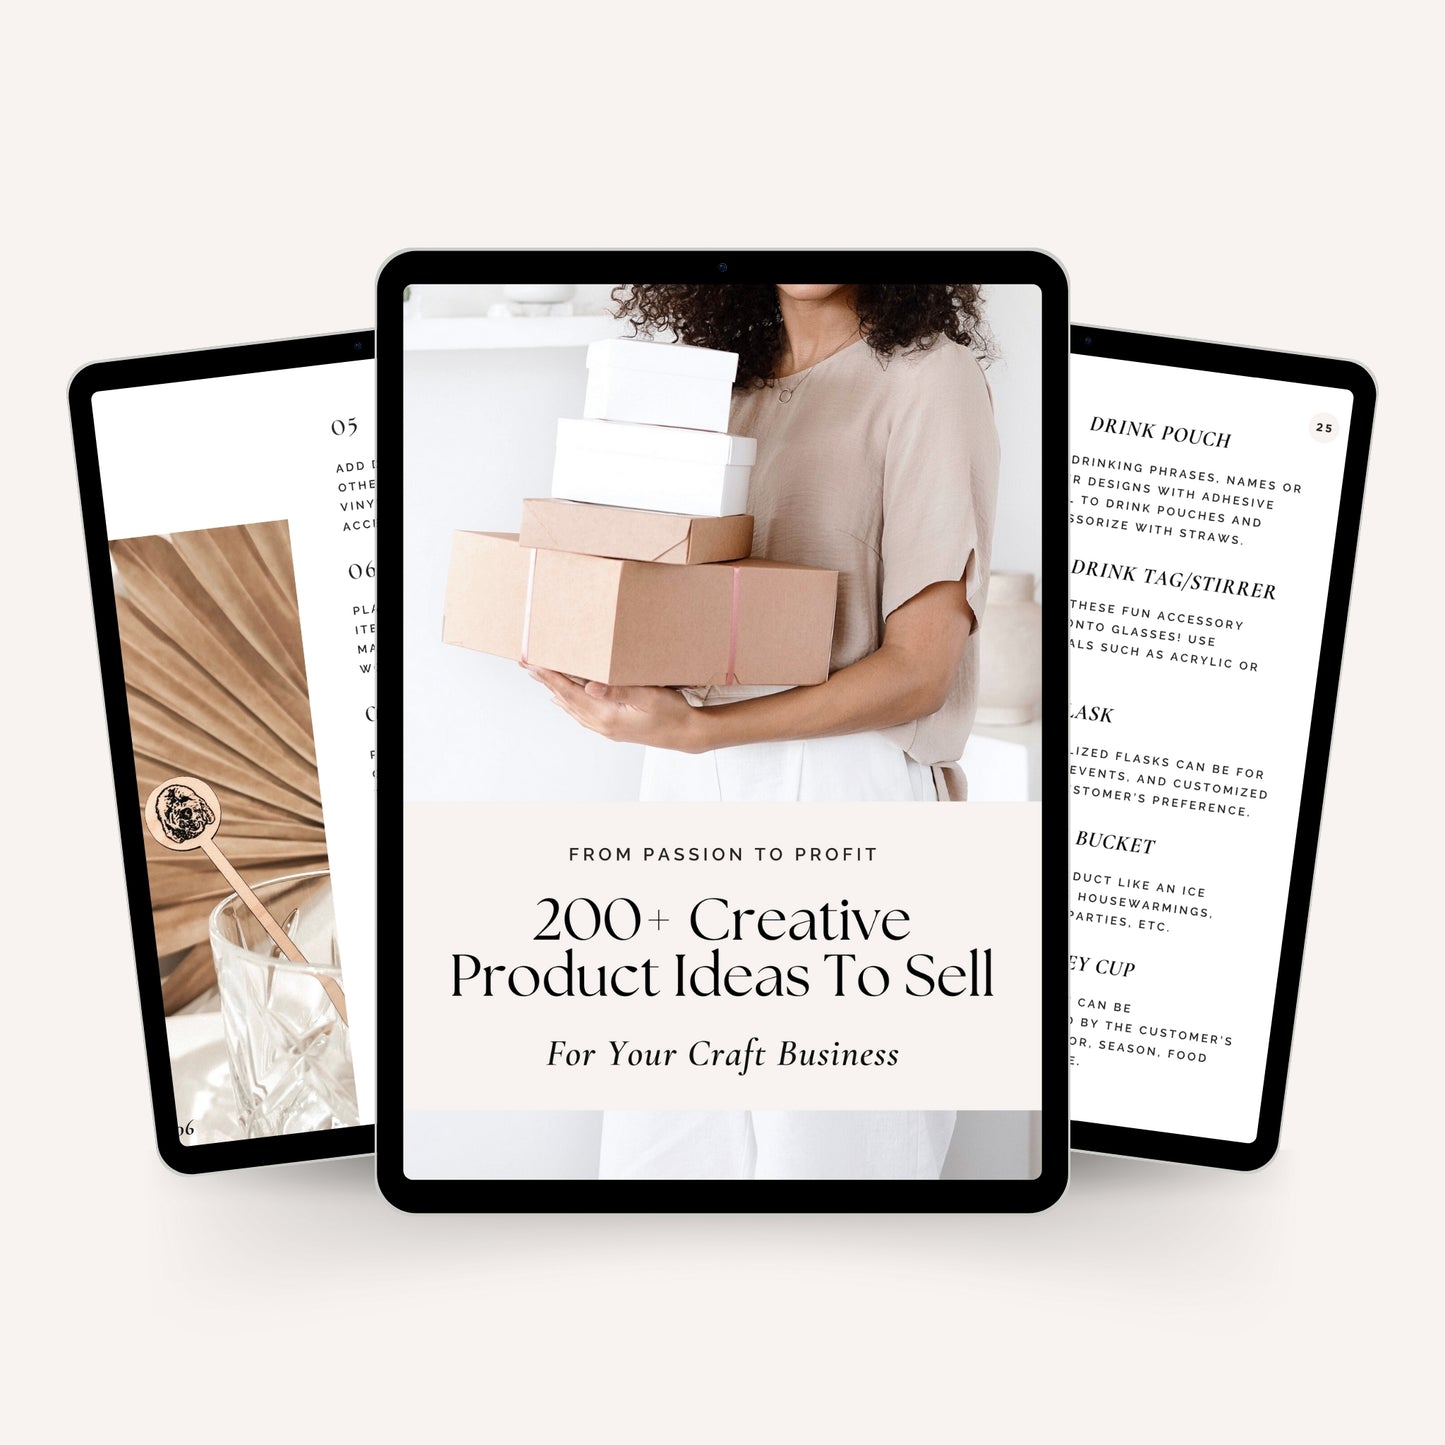 product ideas for craft businesses, how to start a business with cricut, cricut project ideas to sell, project ideas to sell, crafts to sell, cricut crafts to sell, cricut crafts that make money, cricut projects that make money, 200+ creative product ideas to sell, 200 craft business product ideas